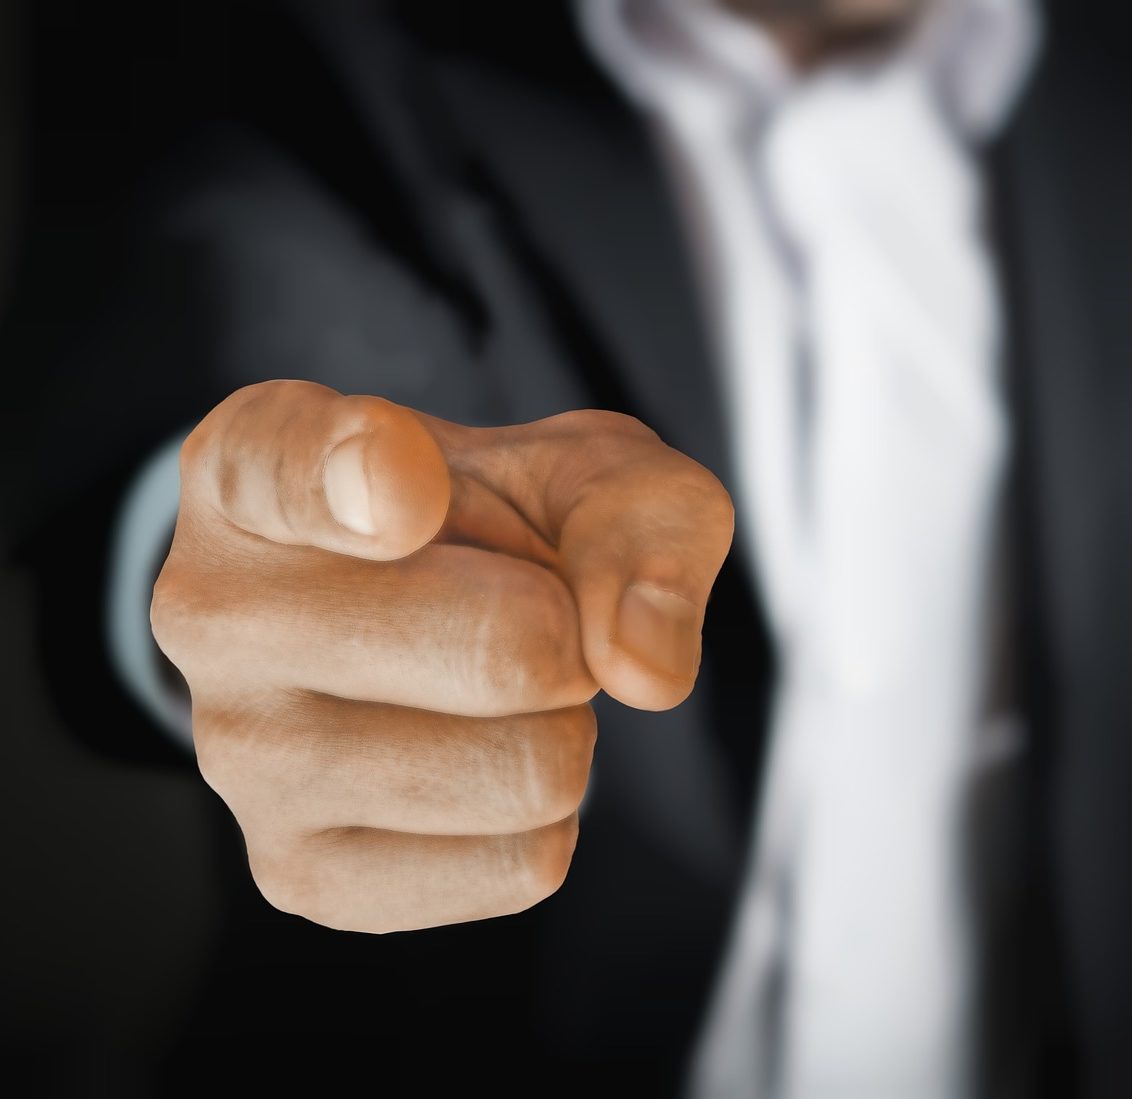 This is a picture of a hand pointing at you from a blurred out torso in a suit.